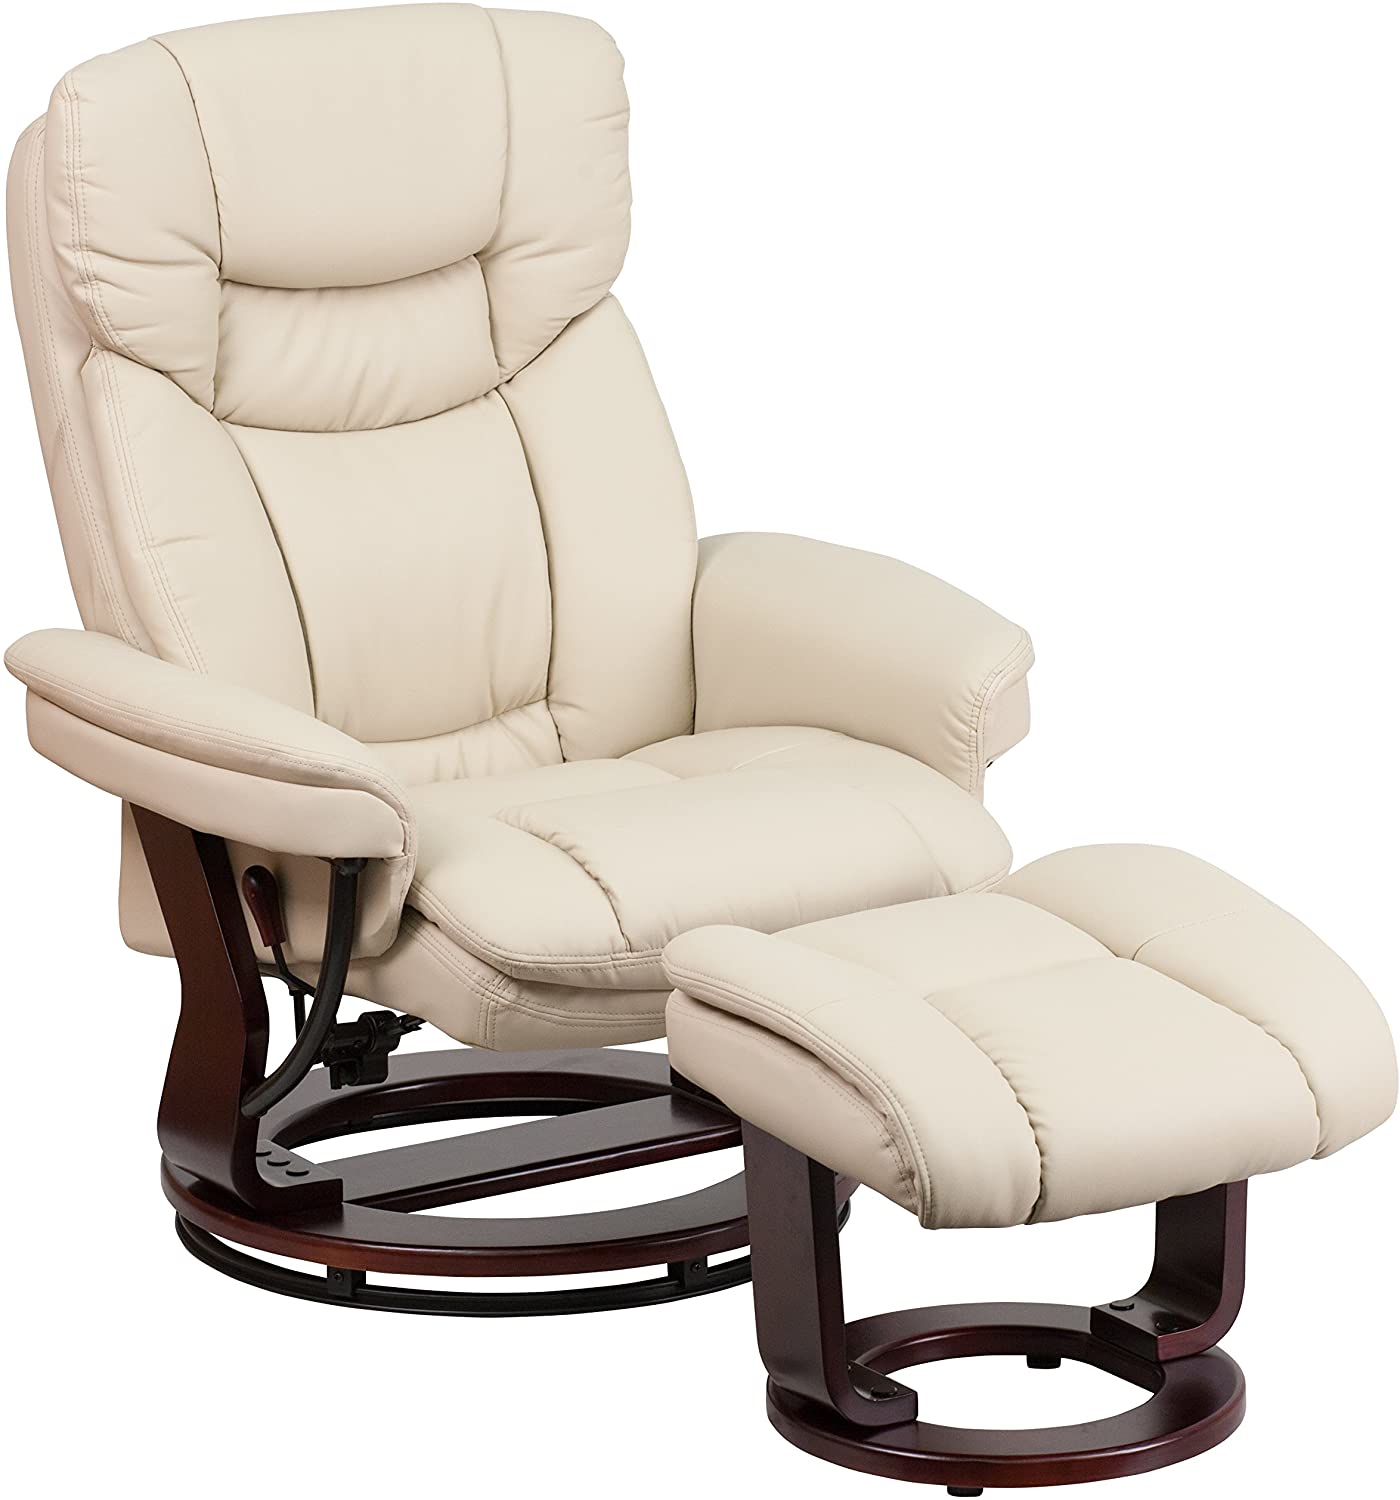 Flash furniture recliner chair with ottoman